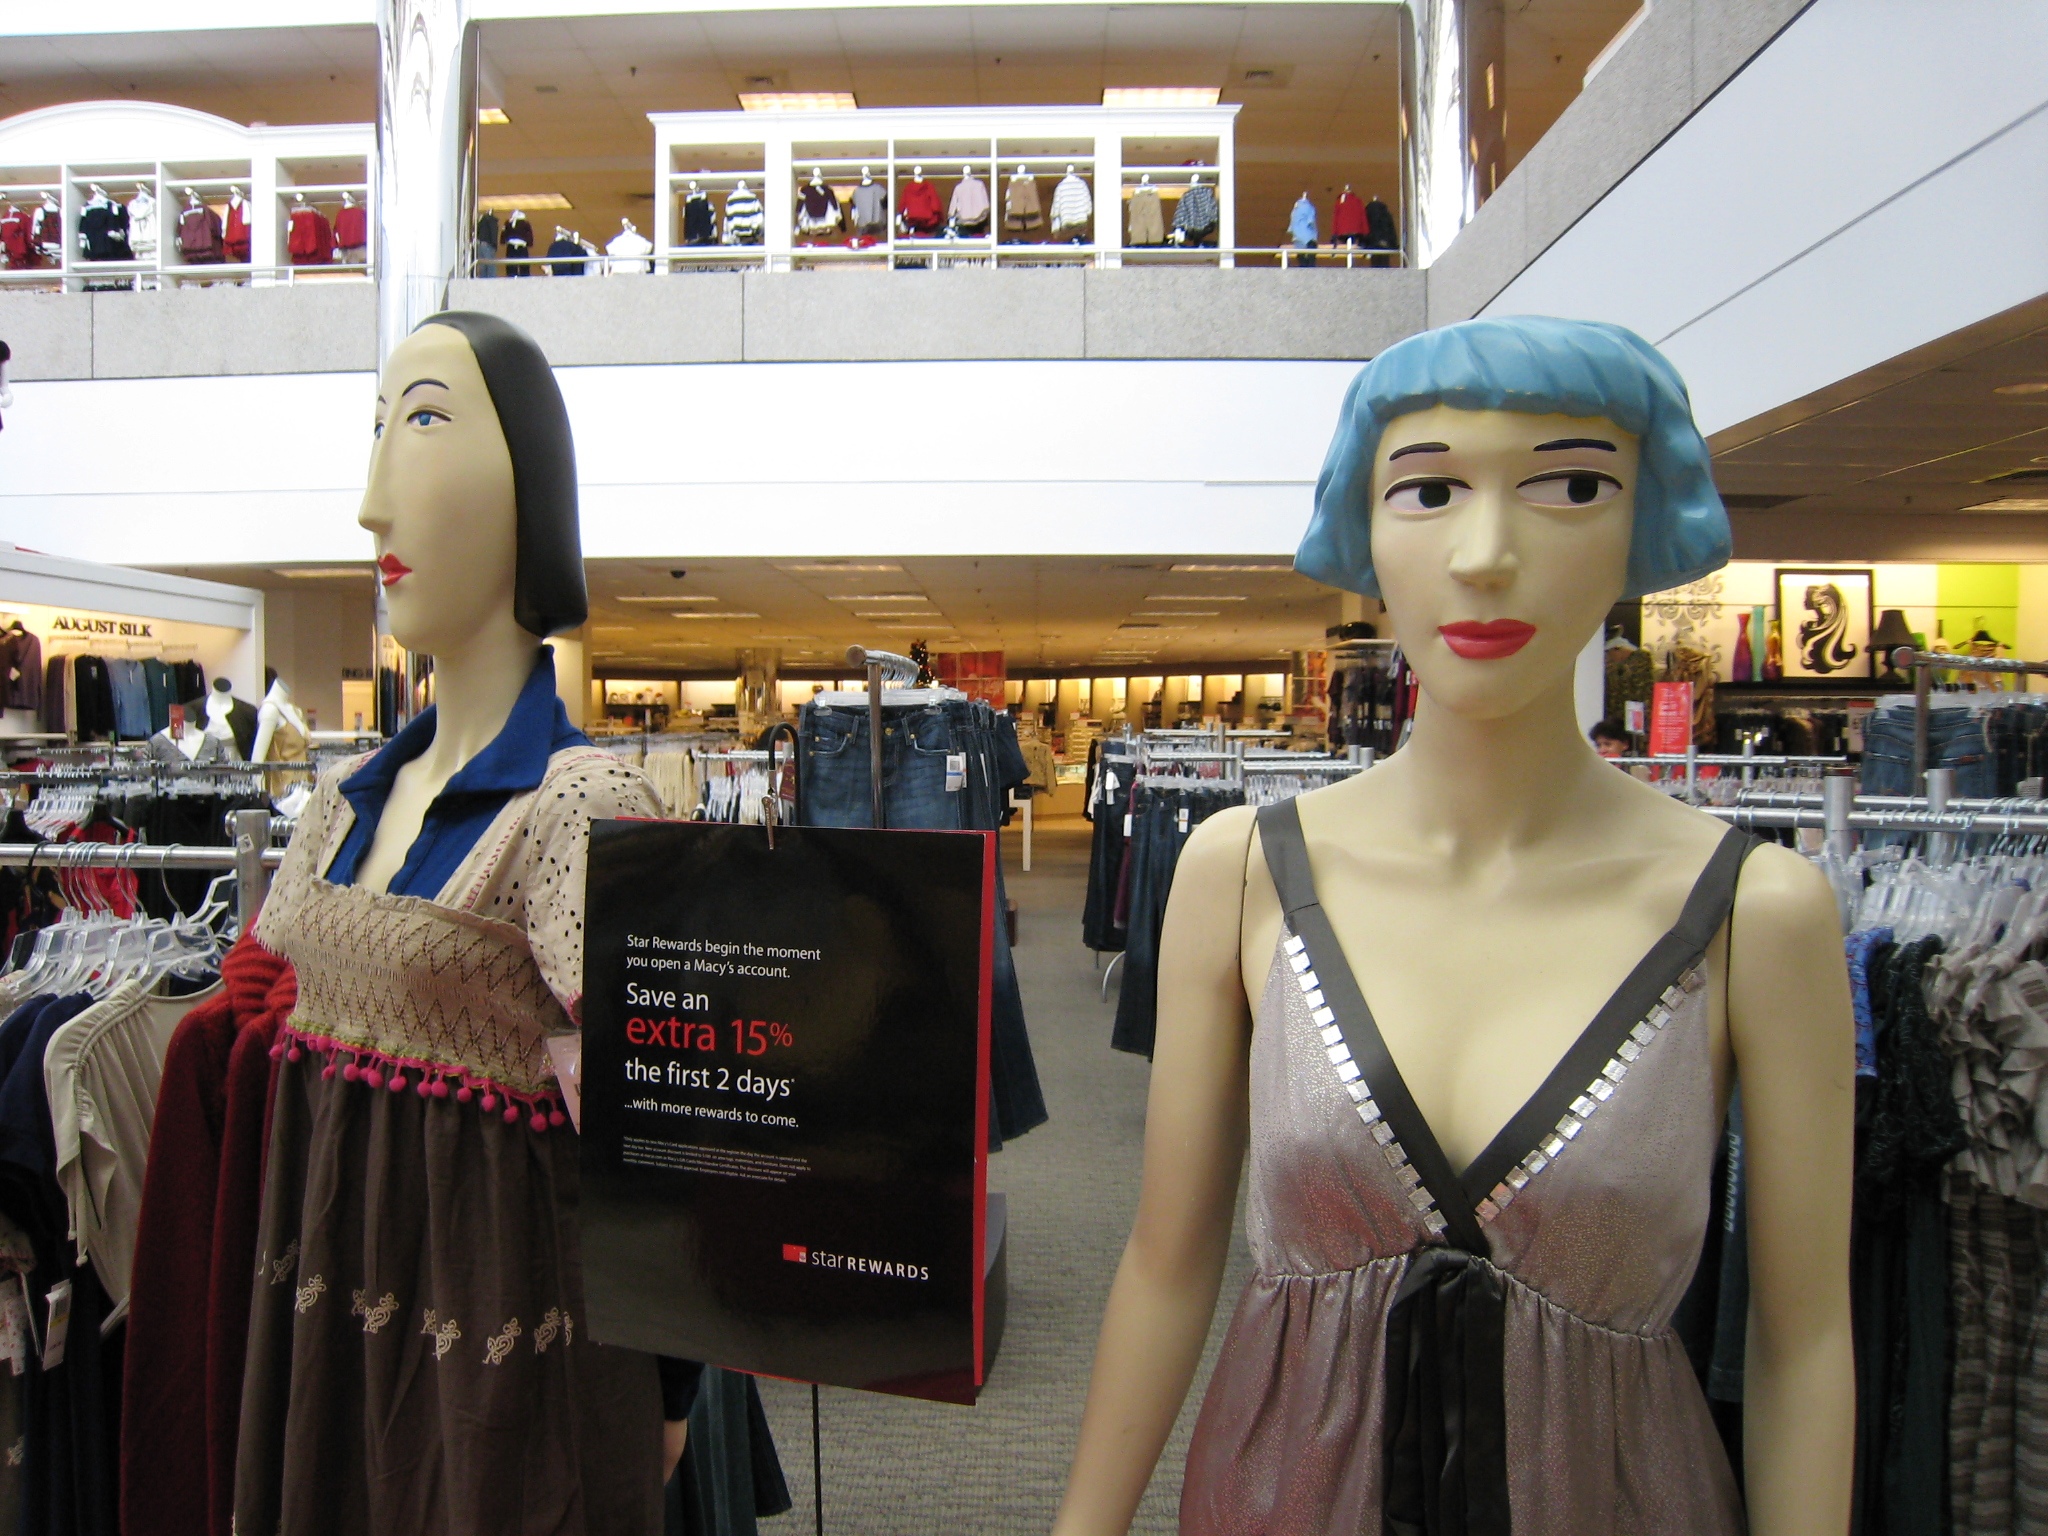 two mannequins, one in the process of making clothes